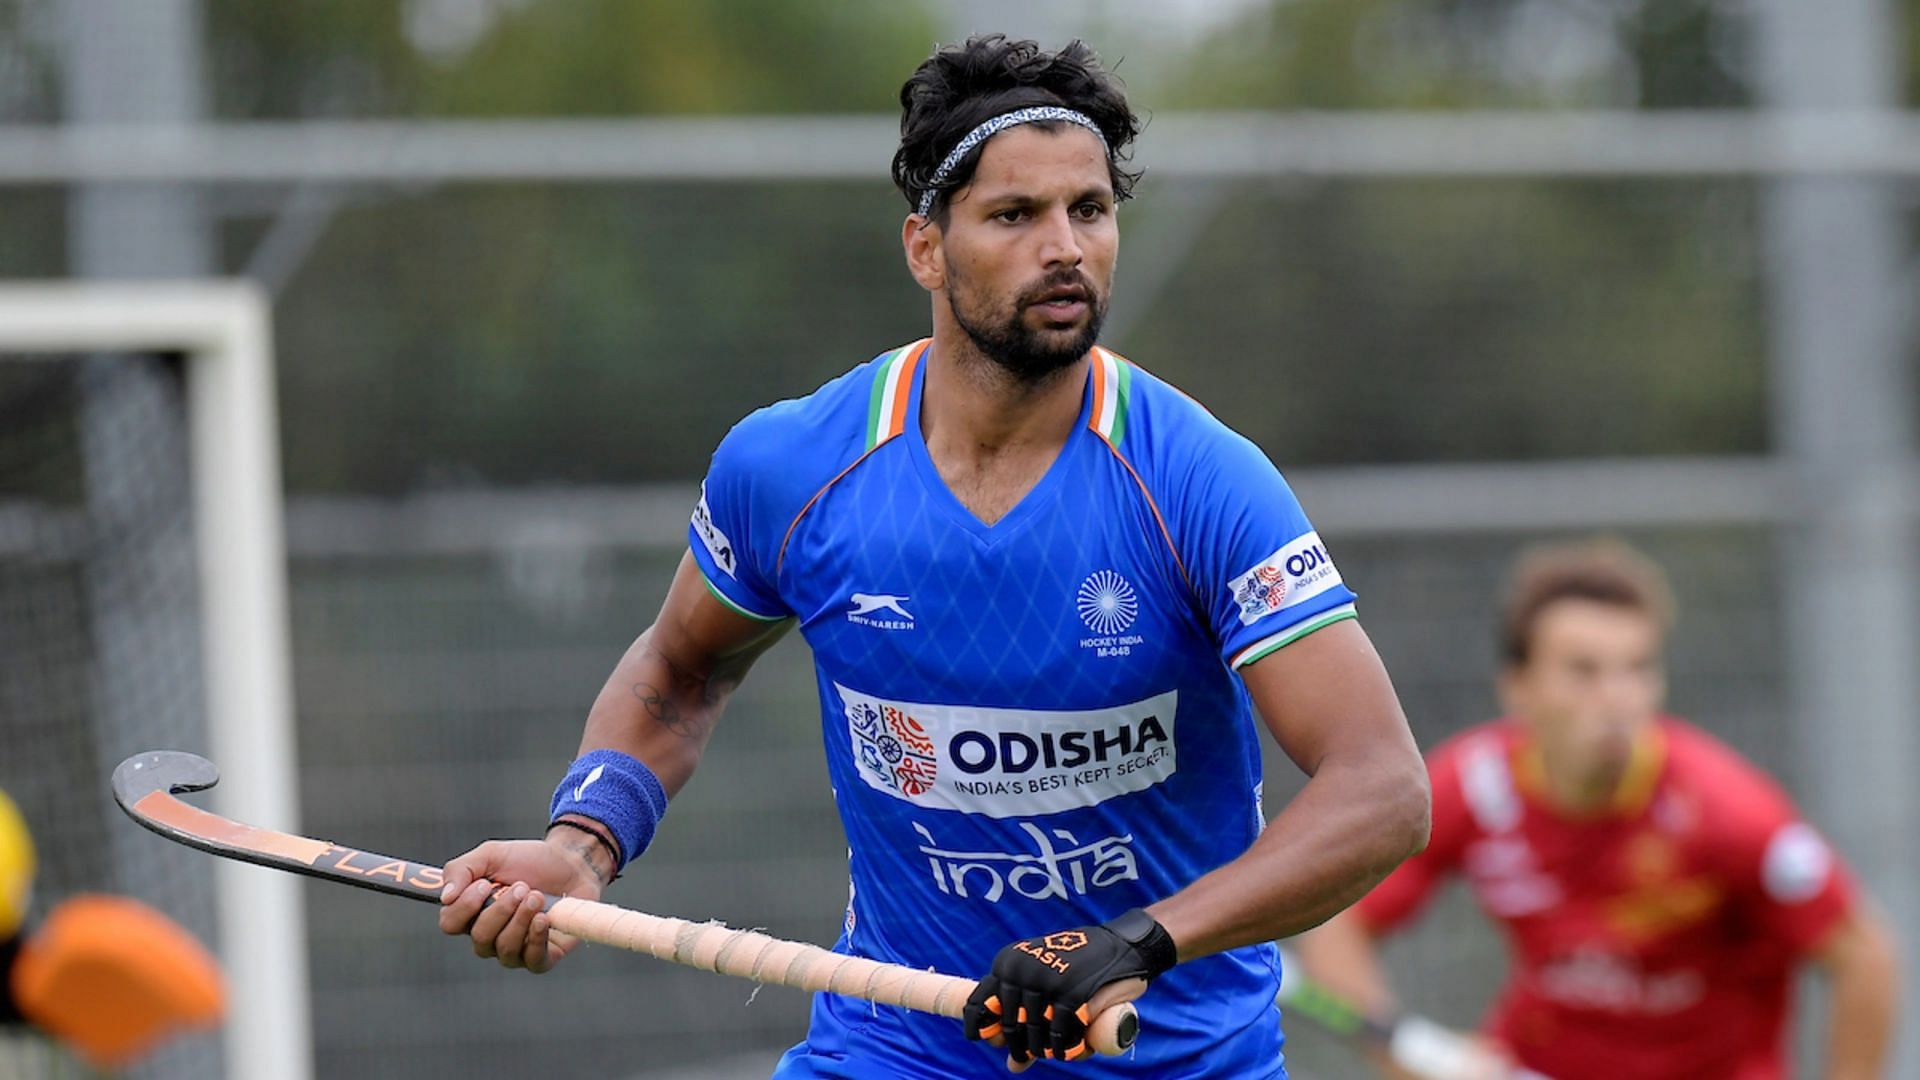 Rupinder Pal Singh was part of the Indian team that clunched the goal medal at the 2014 Asian Games.